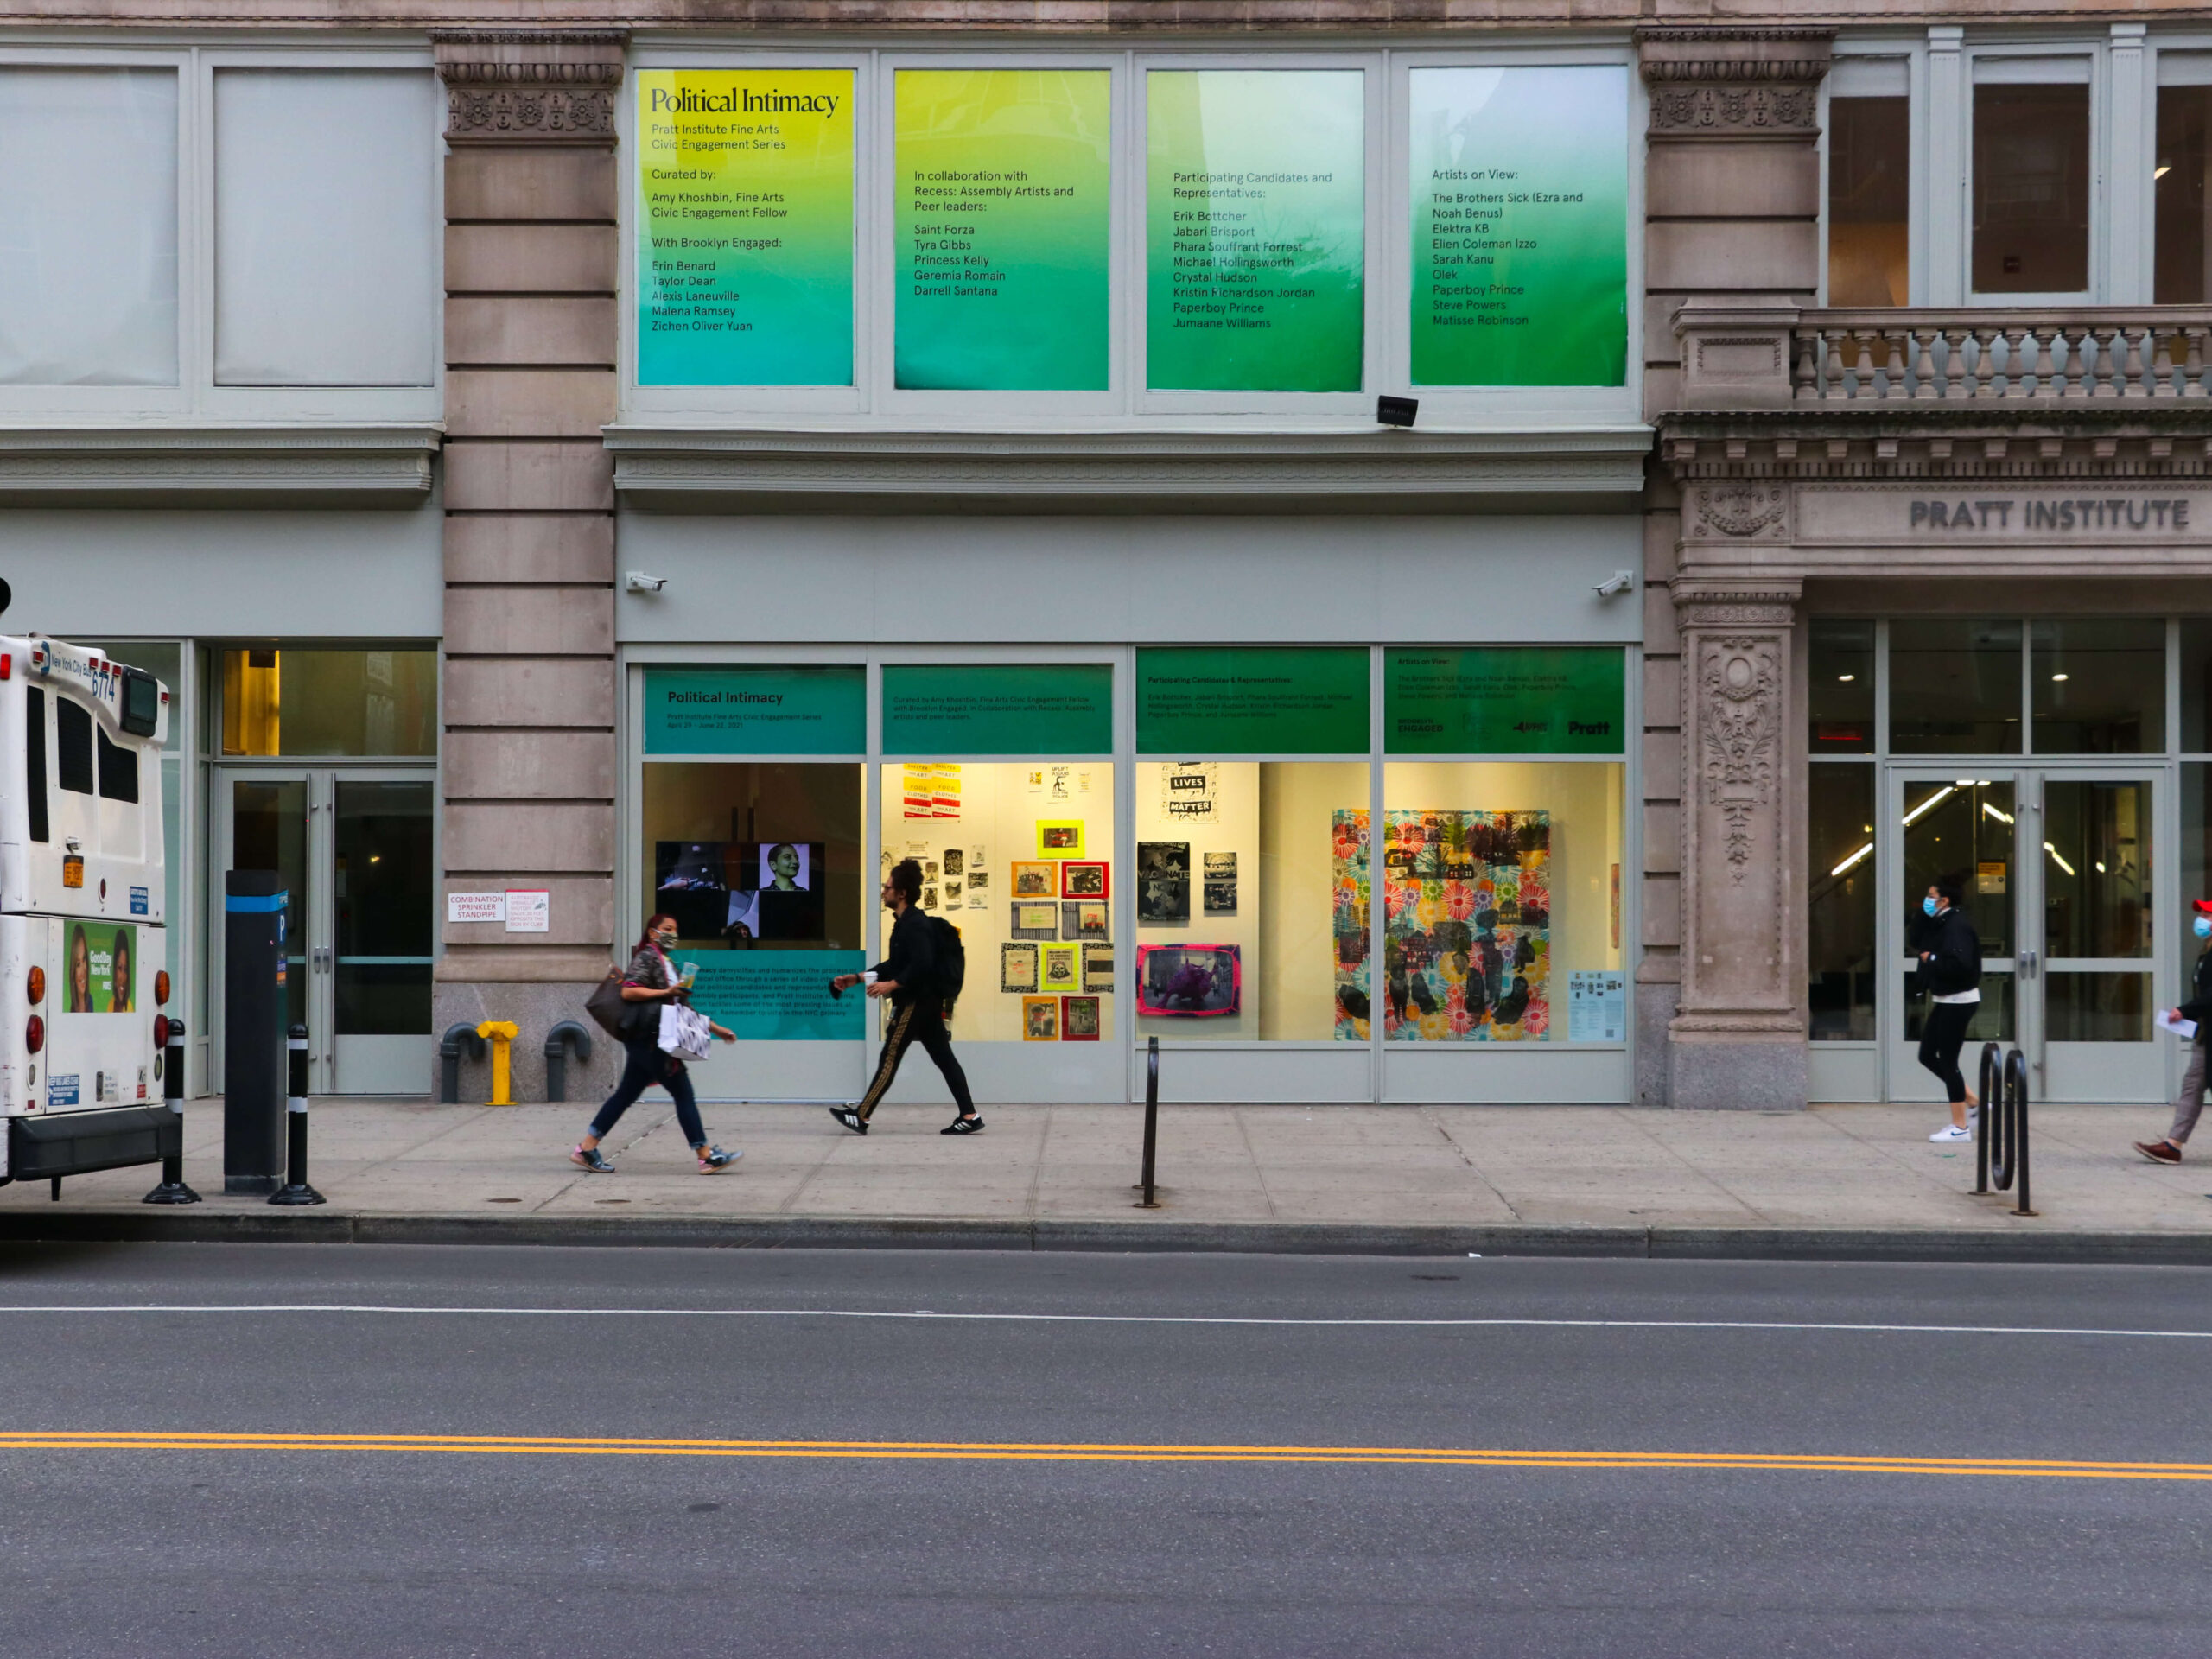 Photo of the façade of a building. It is is green and yellow with large windows. There are people walking on the sidewalk directly in front of it. Part of a bus can be seen at the edge of the image.